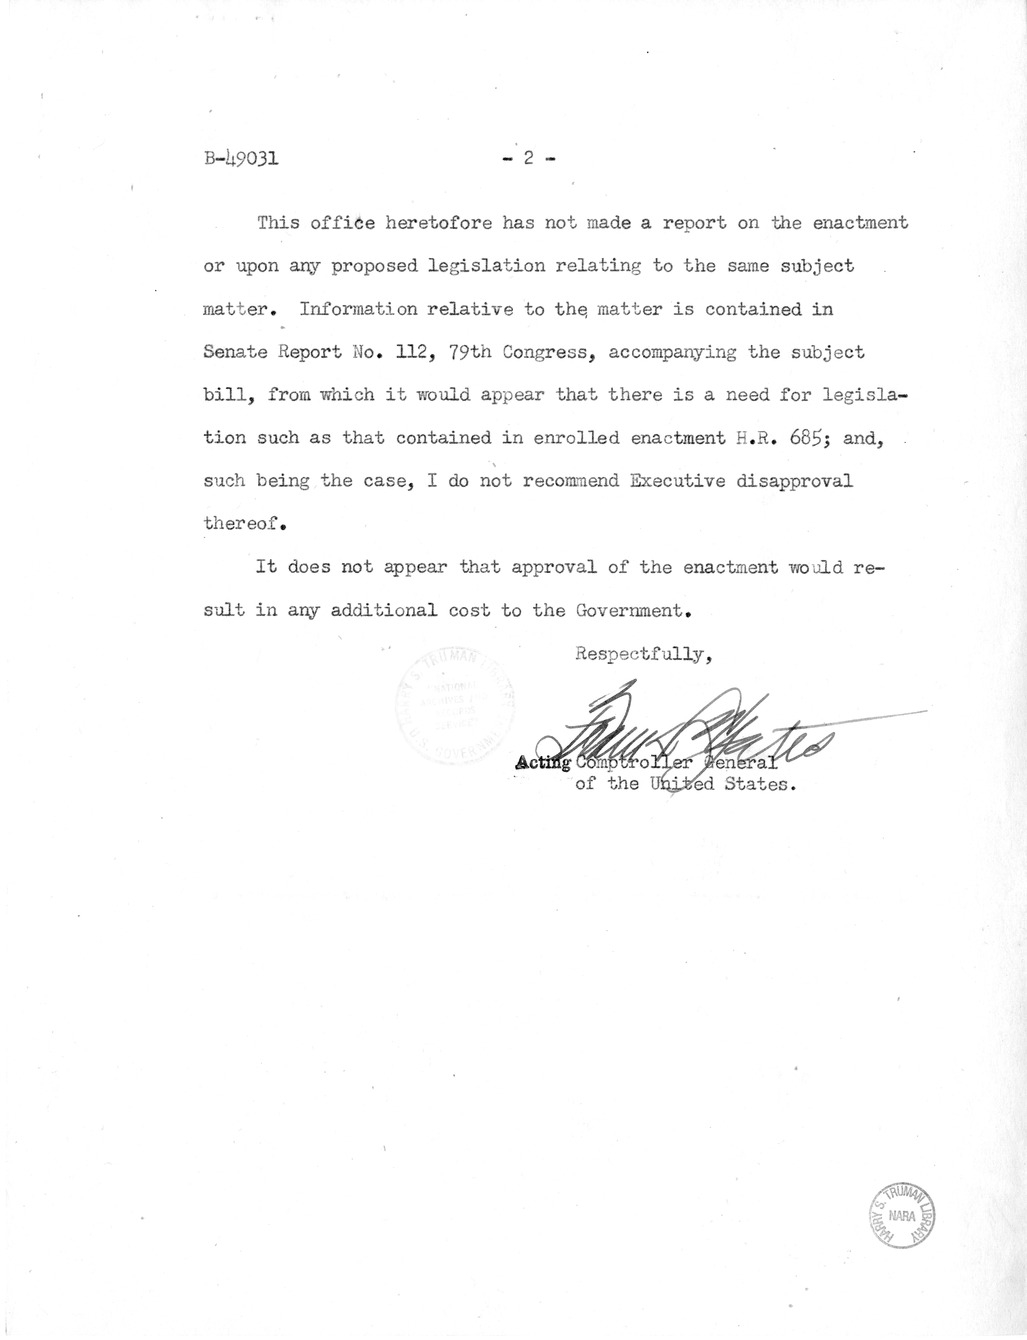 Memorandum from Harold D. Smith to M. C. Latta, H.R. 685, to Amend an Act for the Acquisition of Buildings and Grounds in Foreign Countries for Use of the Government of the United States of America, with Attachments